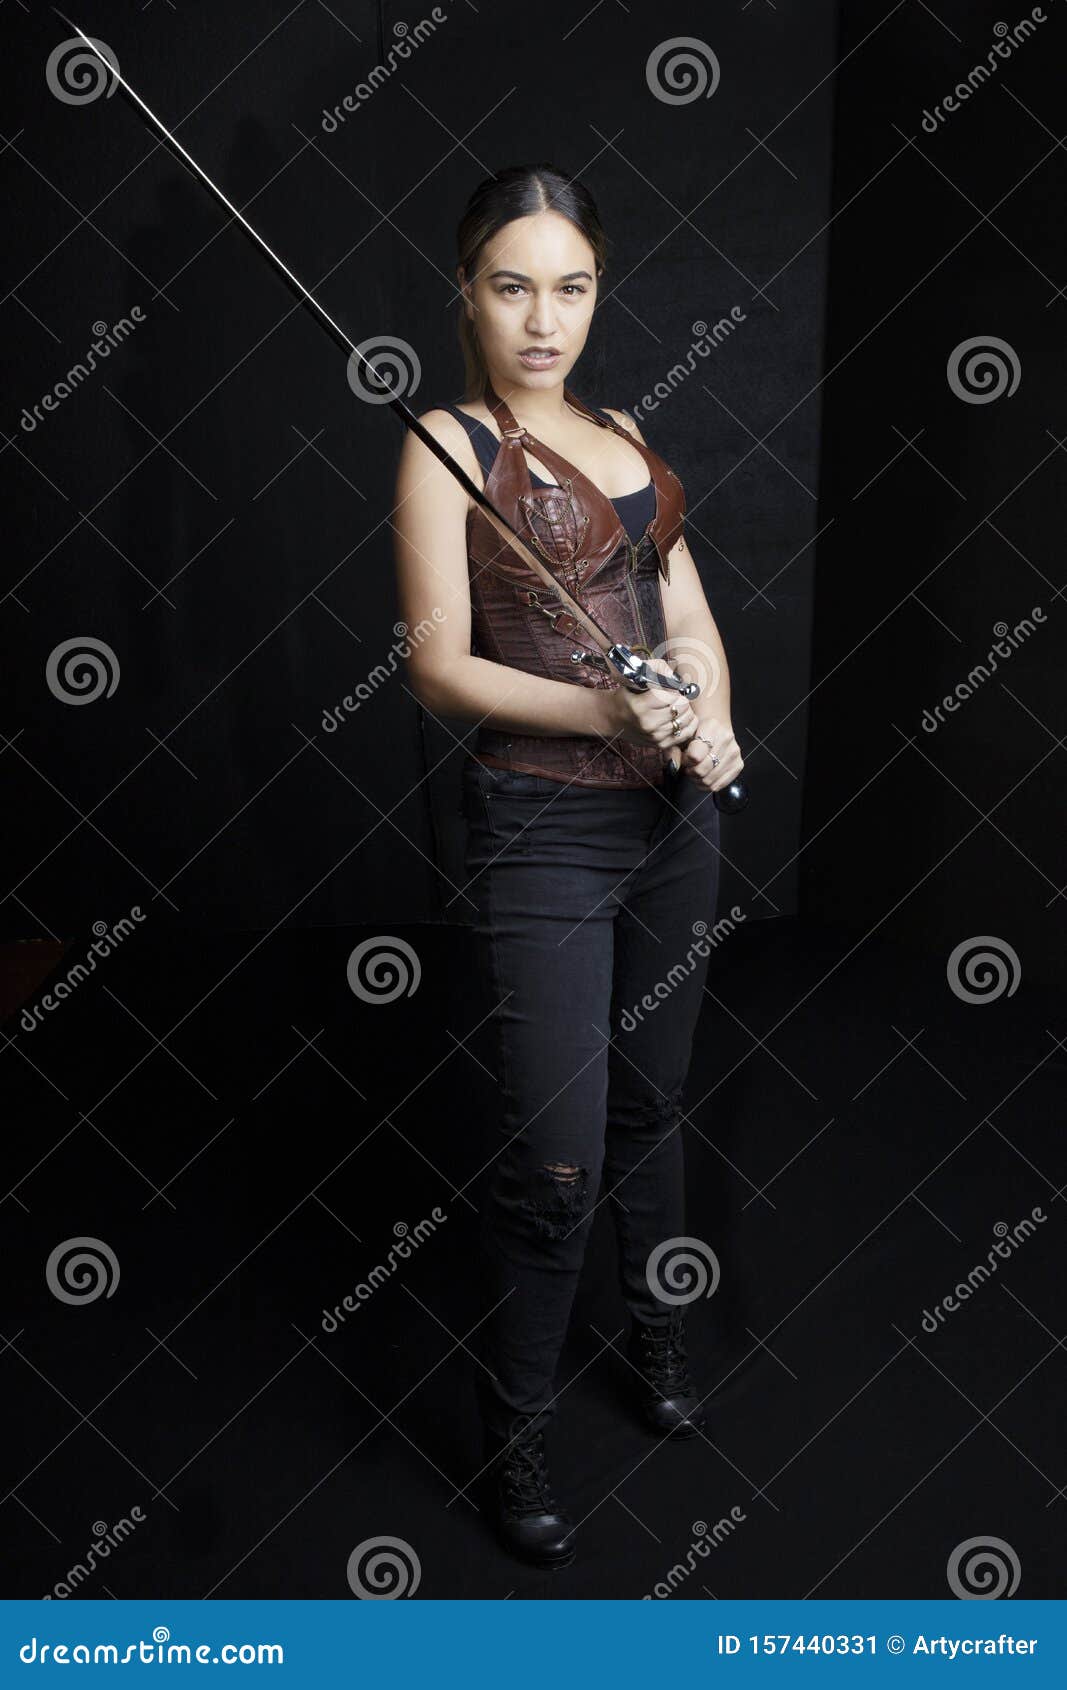 young woman in urban fantasy poses on a black background